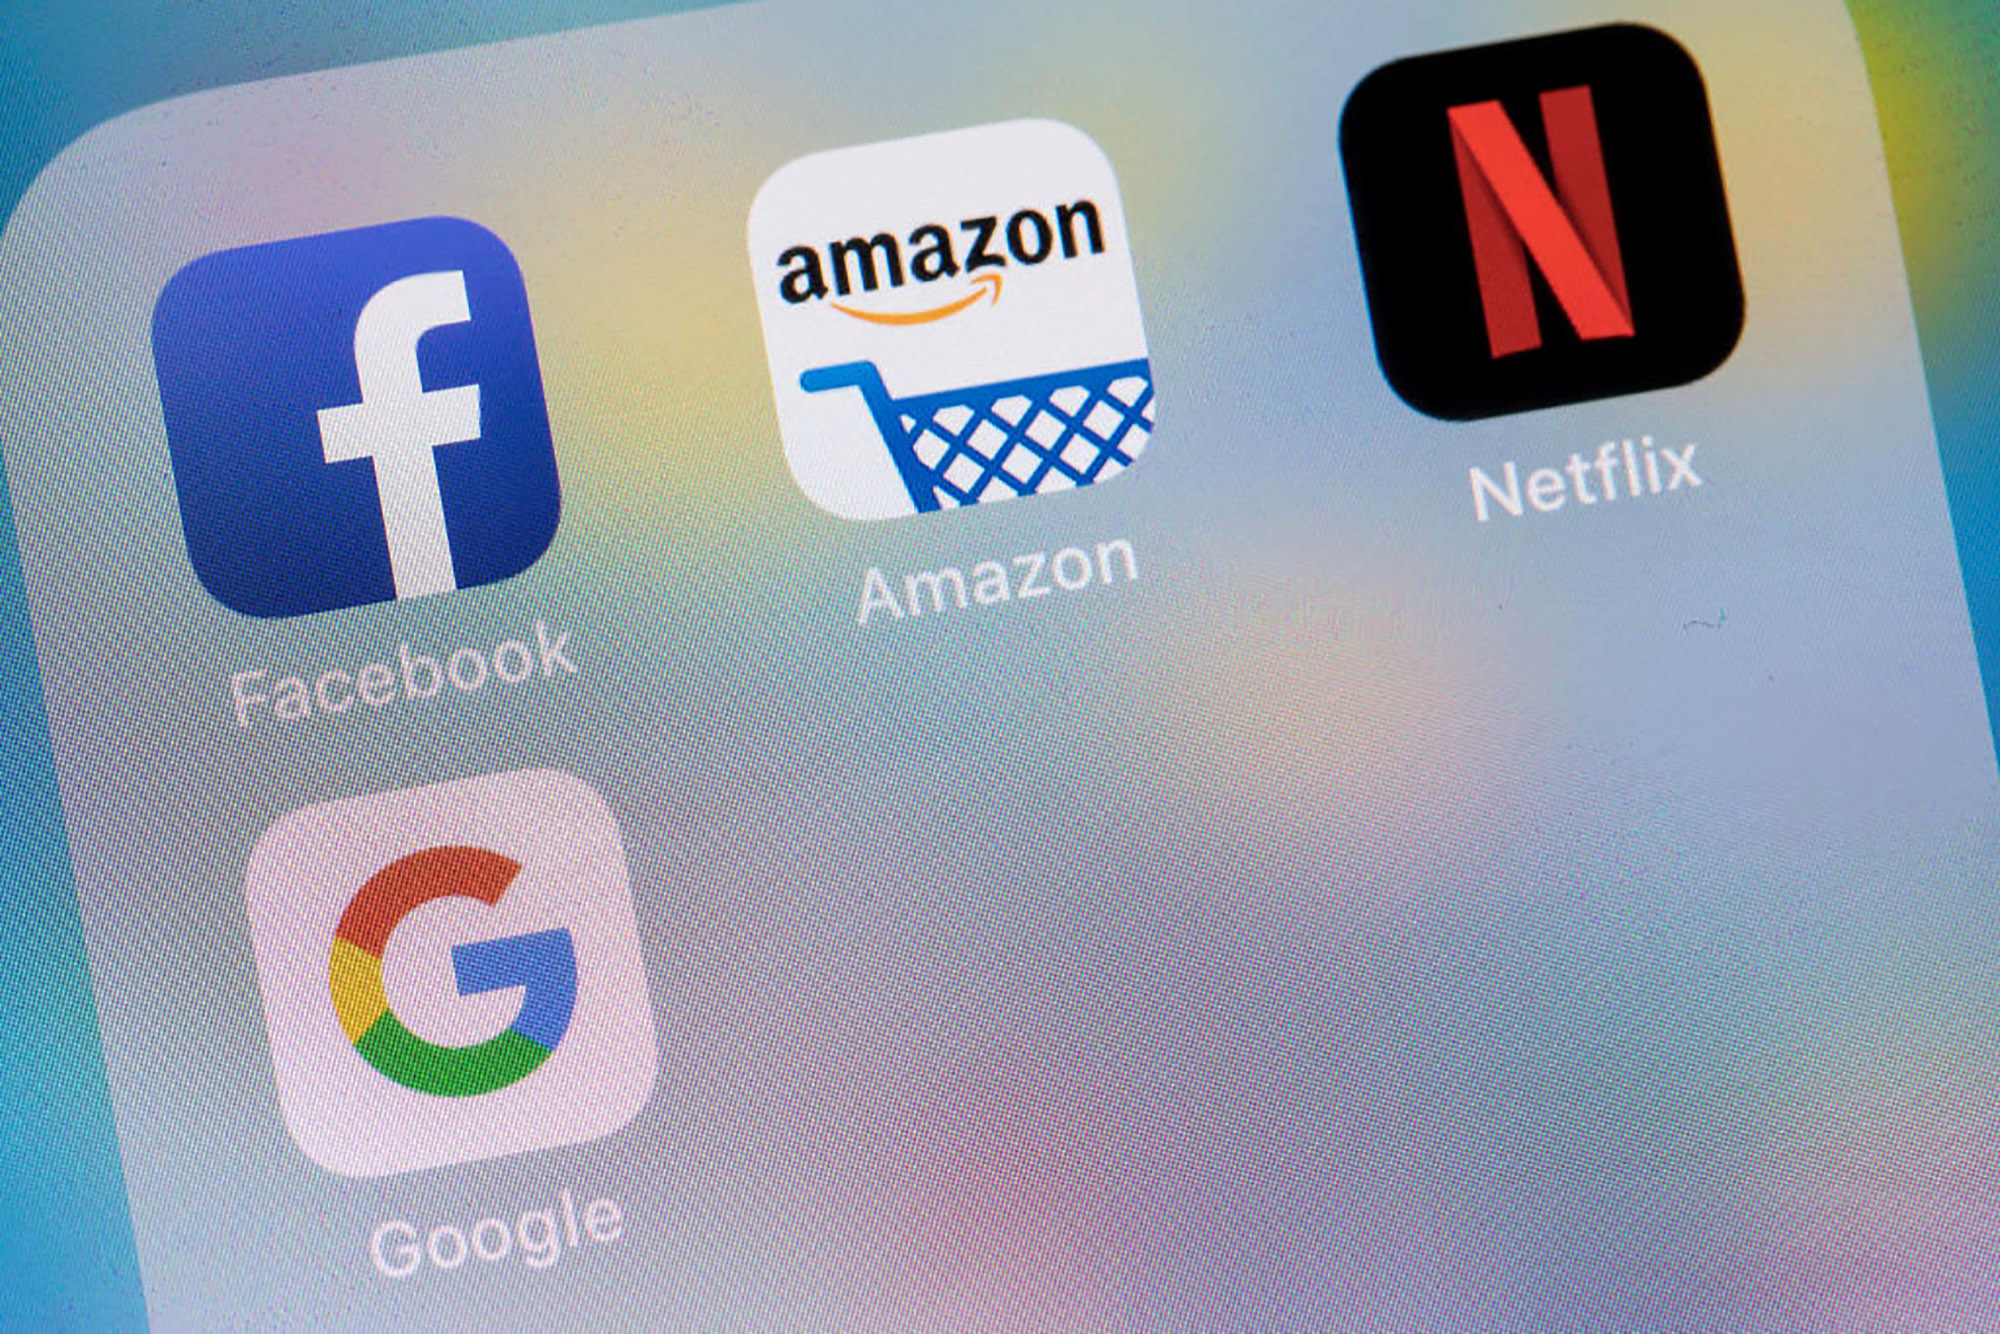 ESG investors holding on to so-called FAANG stocks (Facebook, Amazon, Apple, Netflix, and Google) who hope 2023 will right some of this year’s wrongs may be in for a nasty surprise.